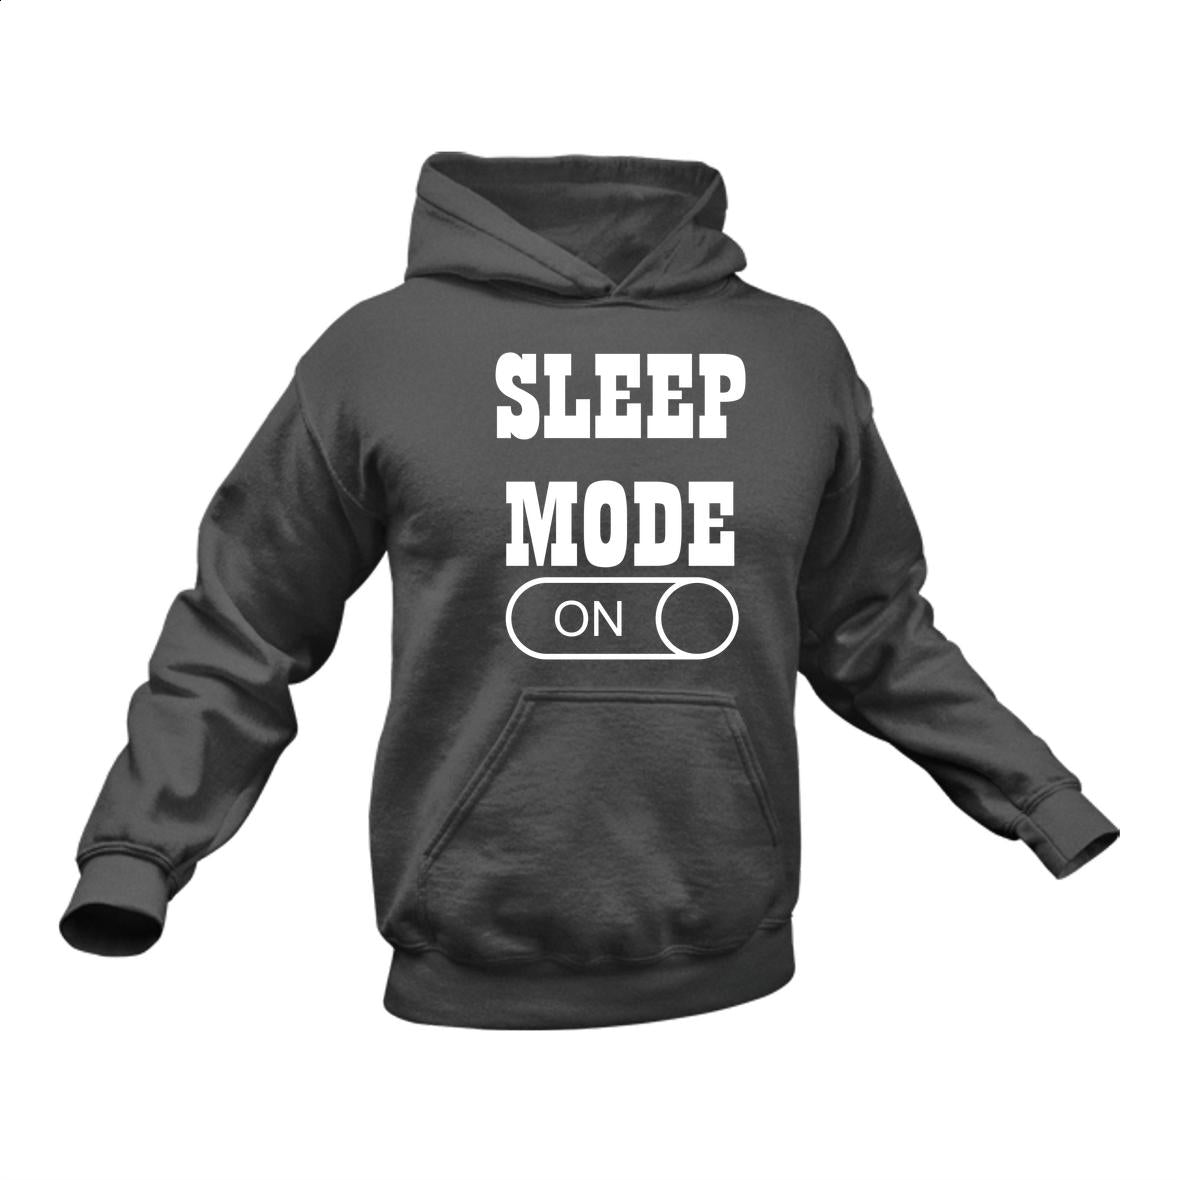 Knitwear & Hoodies - Sleep Mode On Hoodie - Makes a Great Gift for that ...